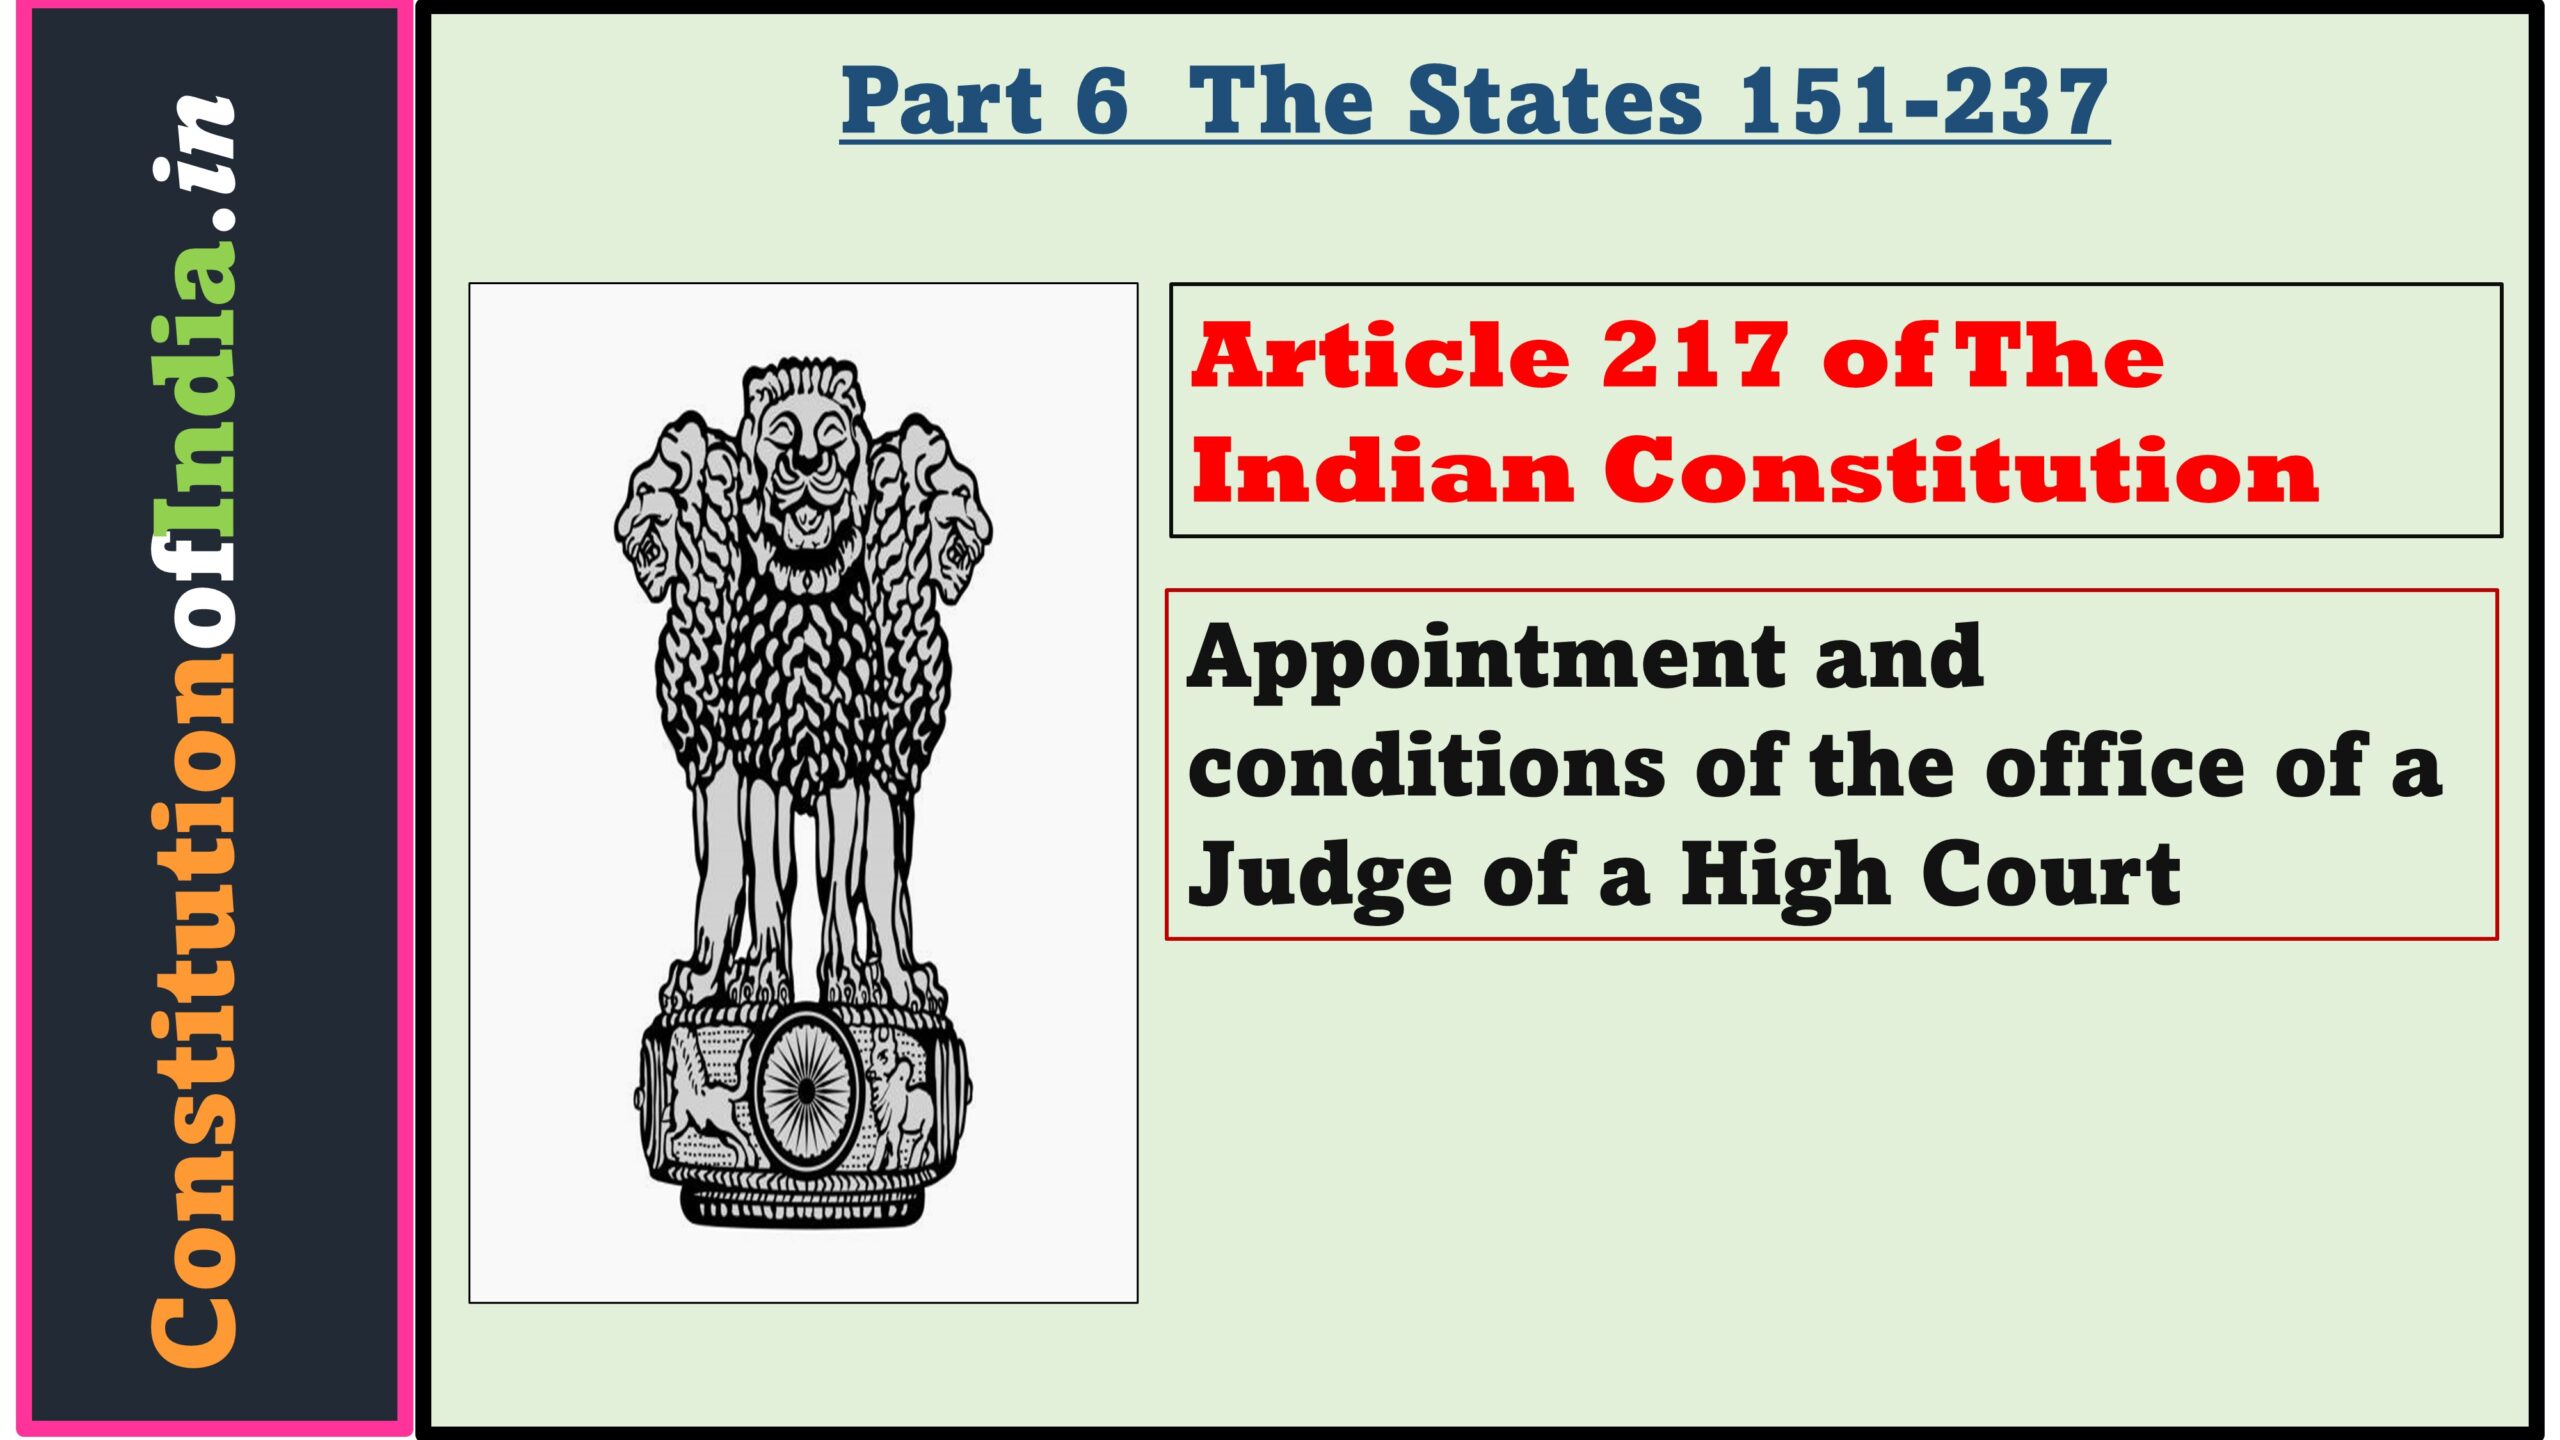 Article 217 of The Indian Constitution